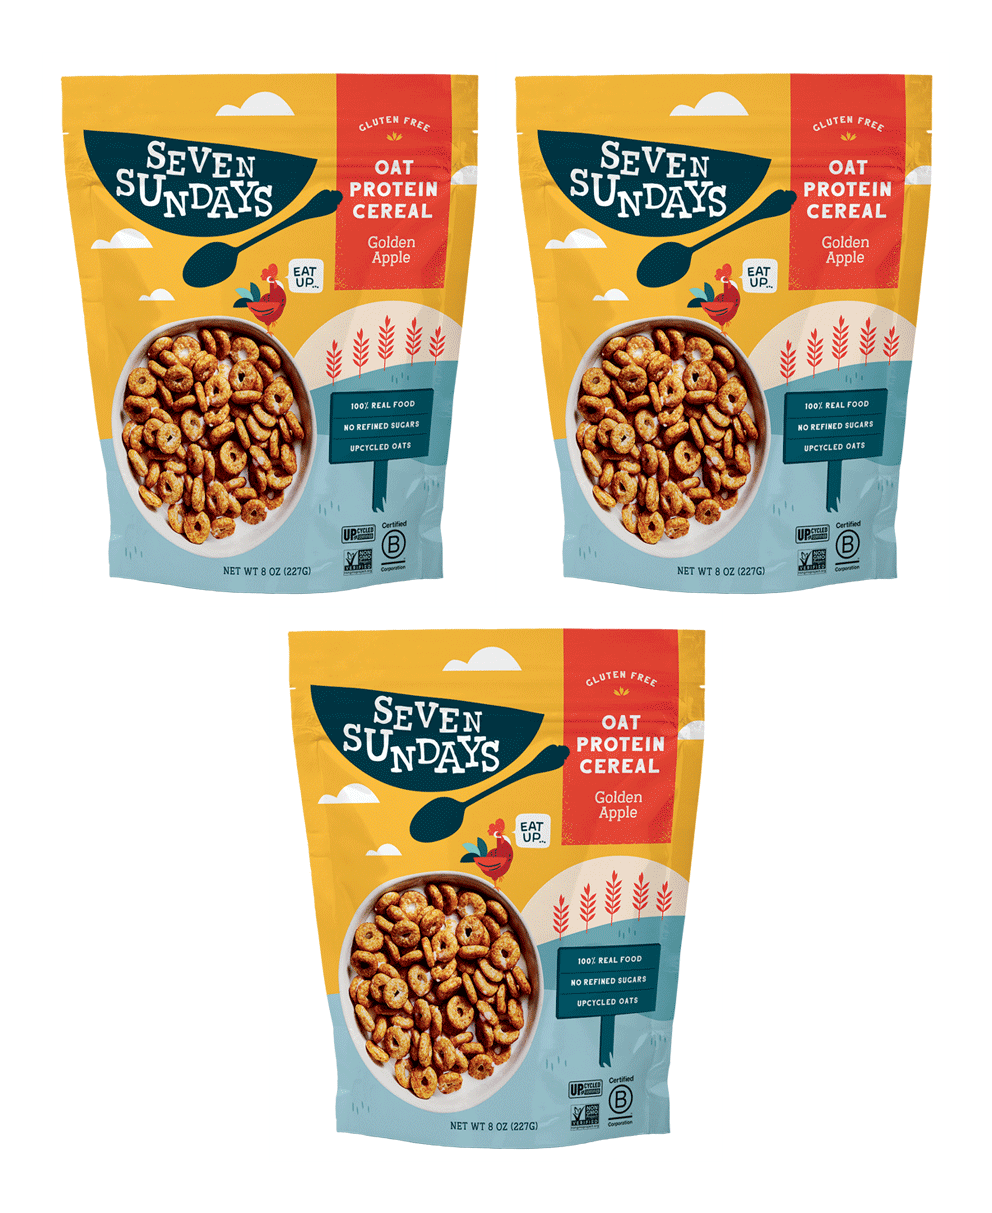 Limited Edition: Golden Apple Oat Protein Cereal